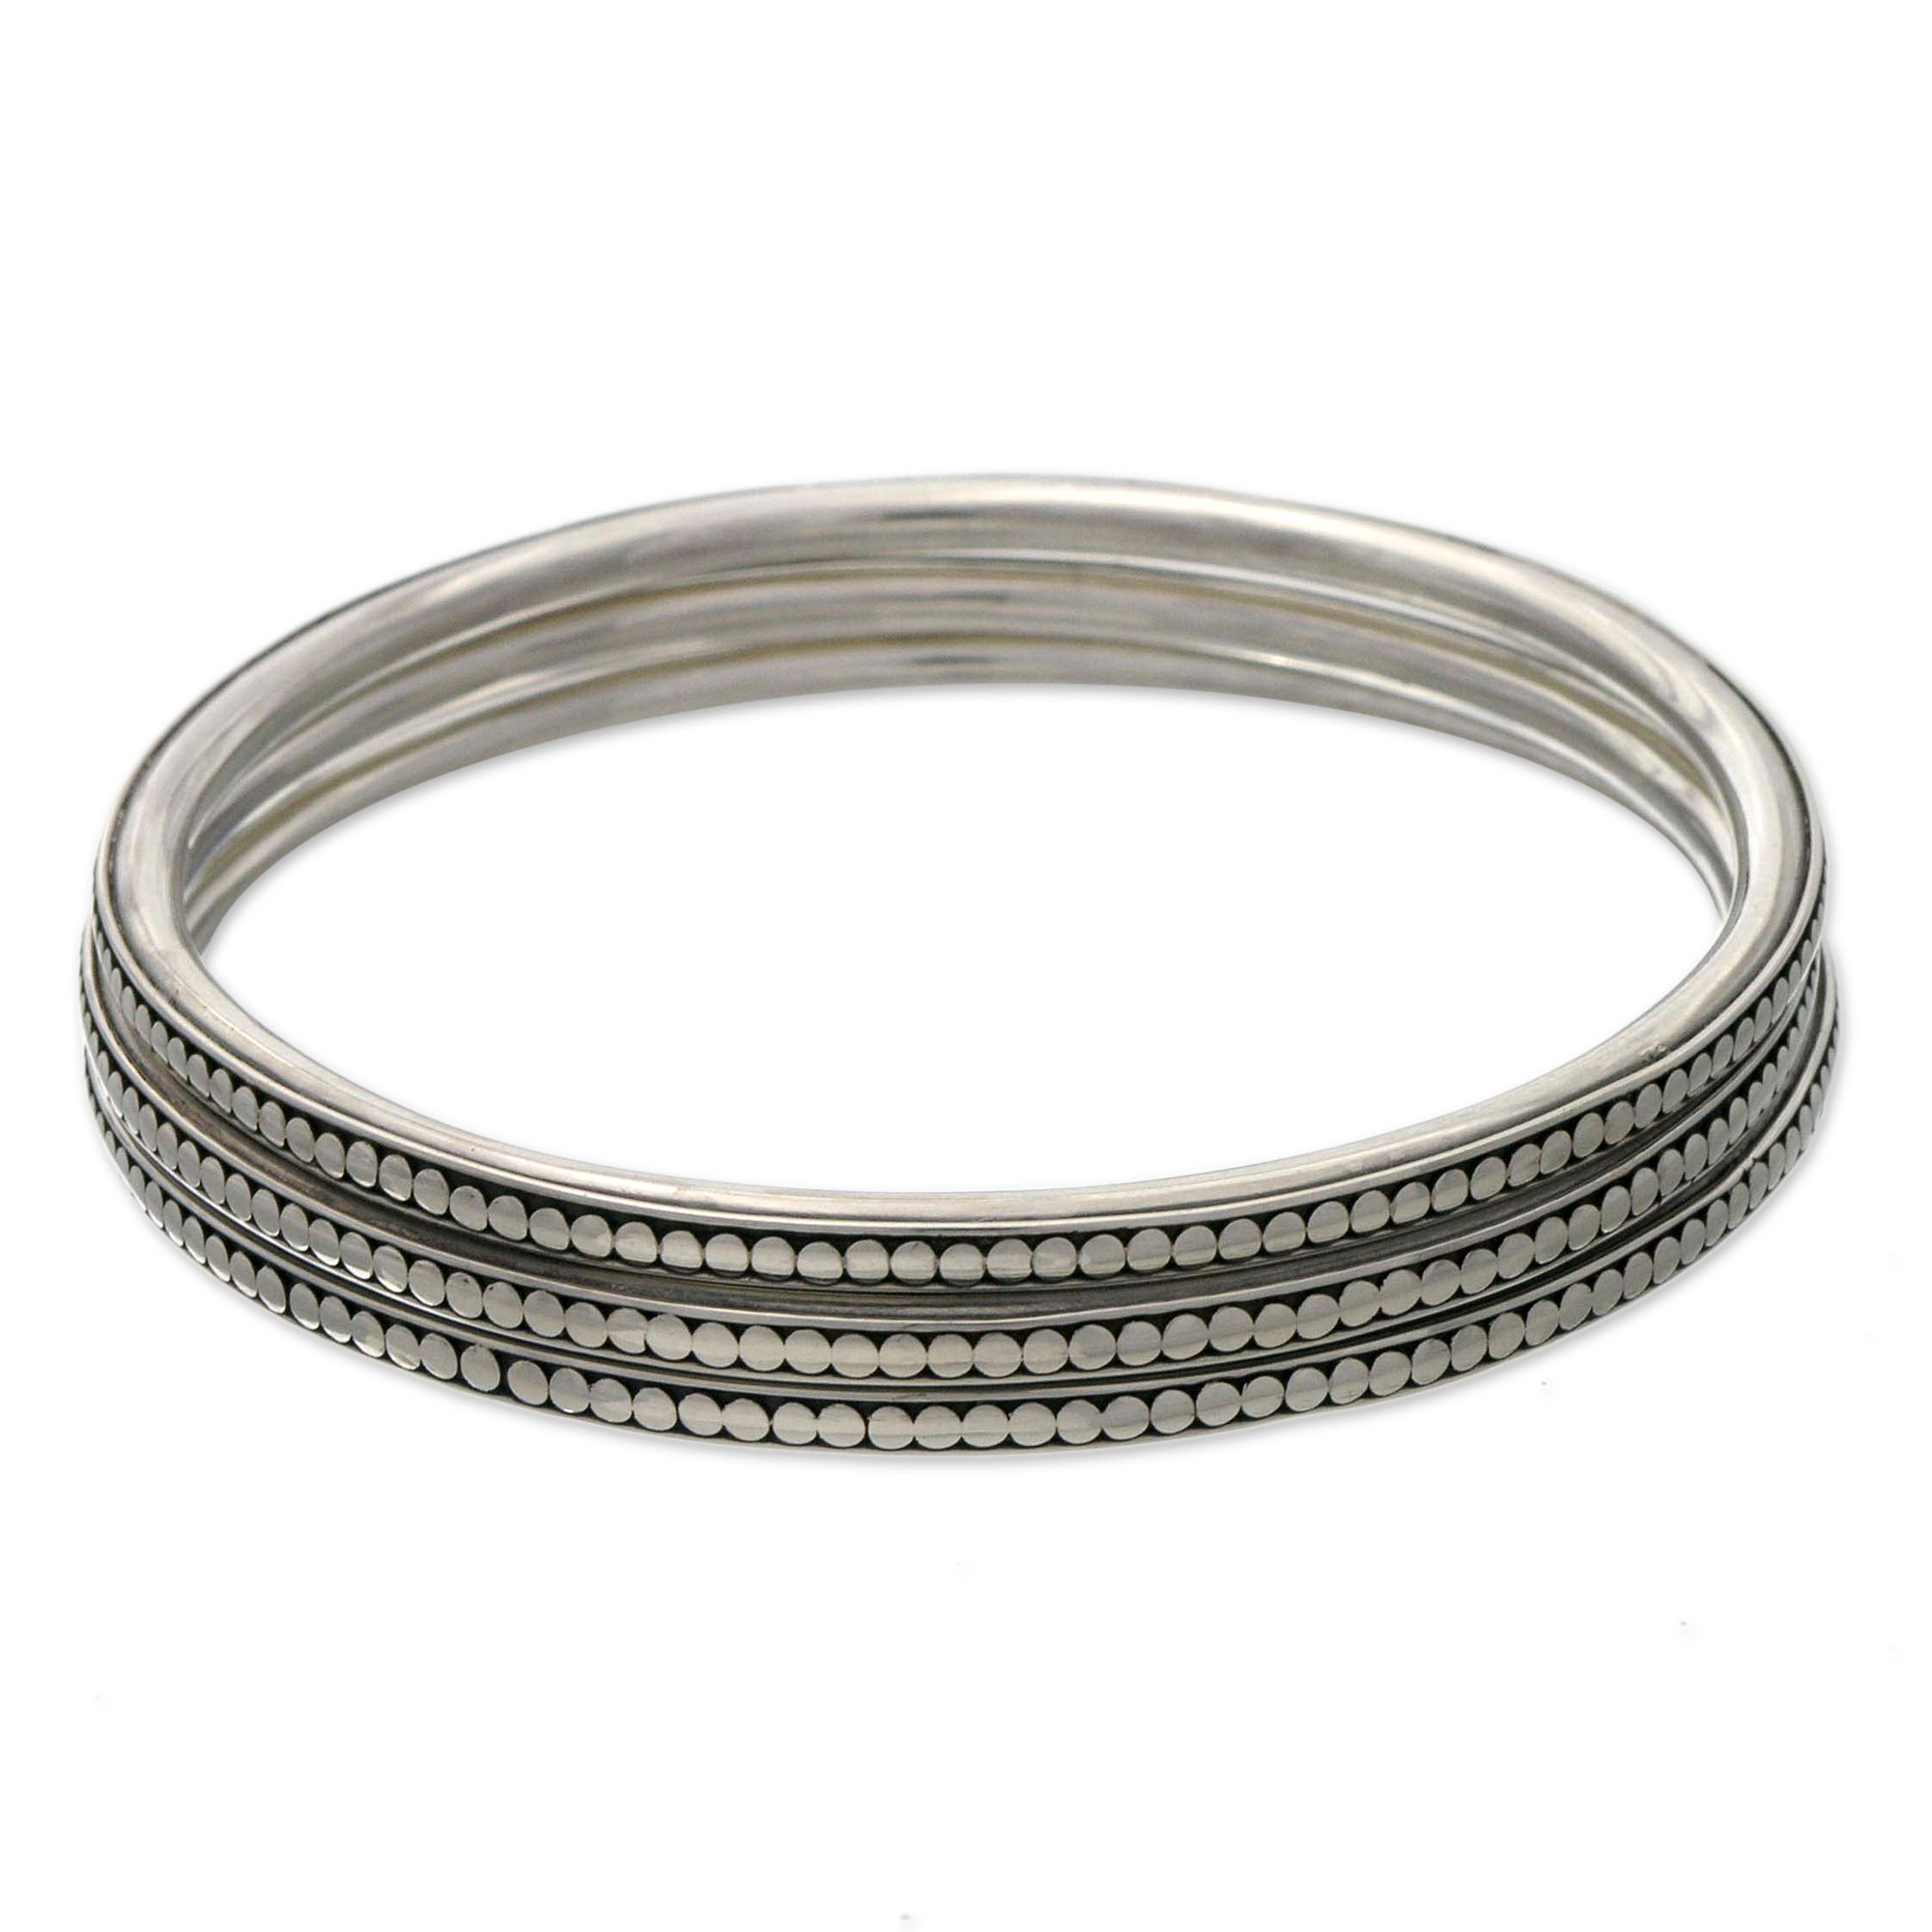 UNICEF Market | Hand Wrought Sterling Silver Bangles - Luna's Eclipse